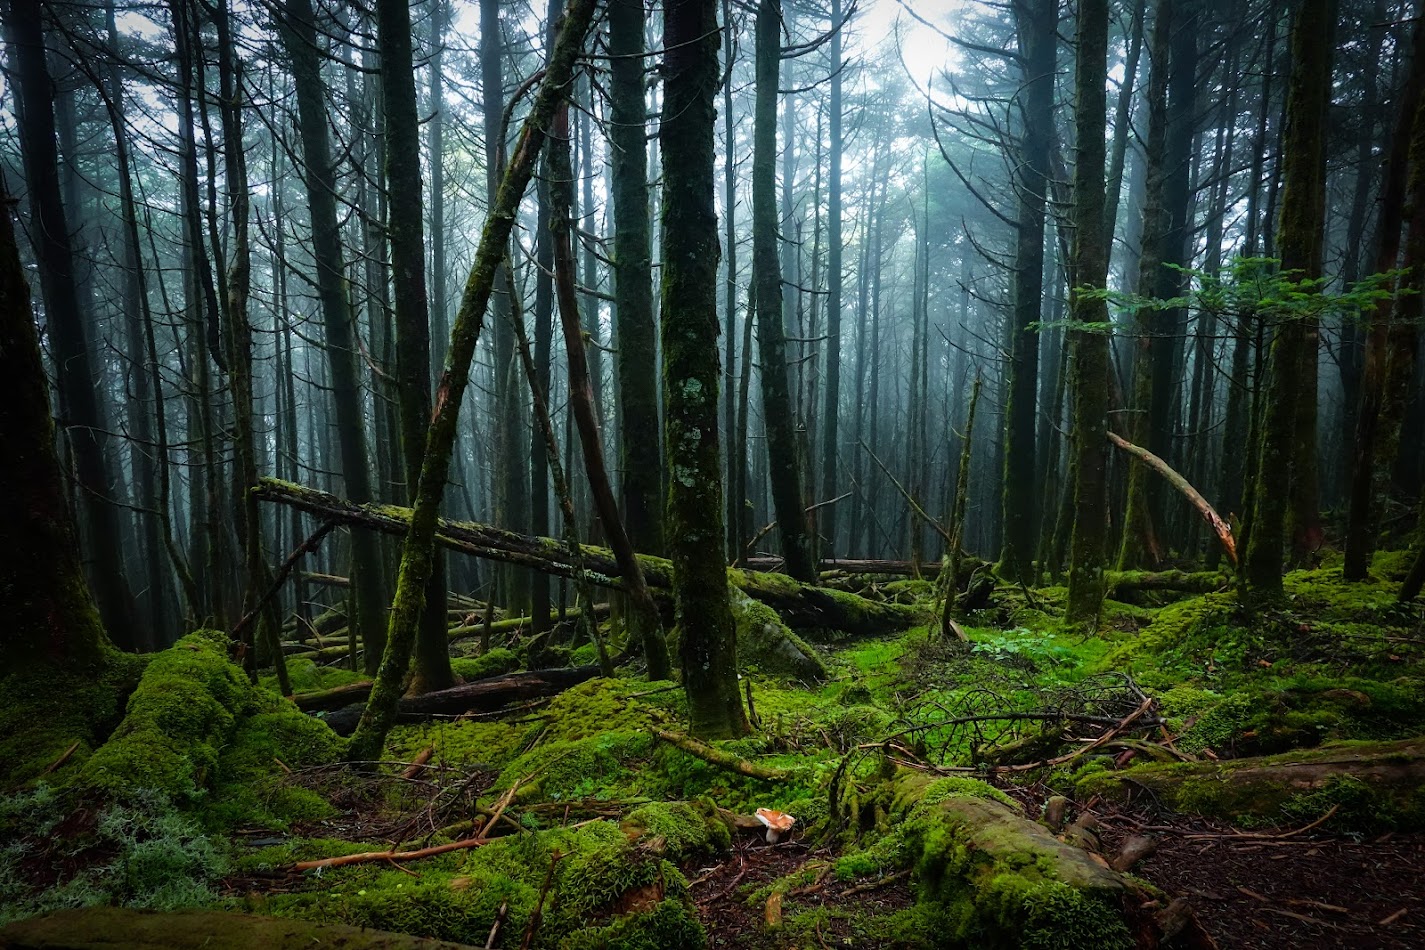 a misty landscape with trees and vibrant moss on the forest floor